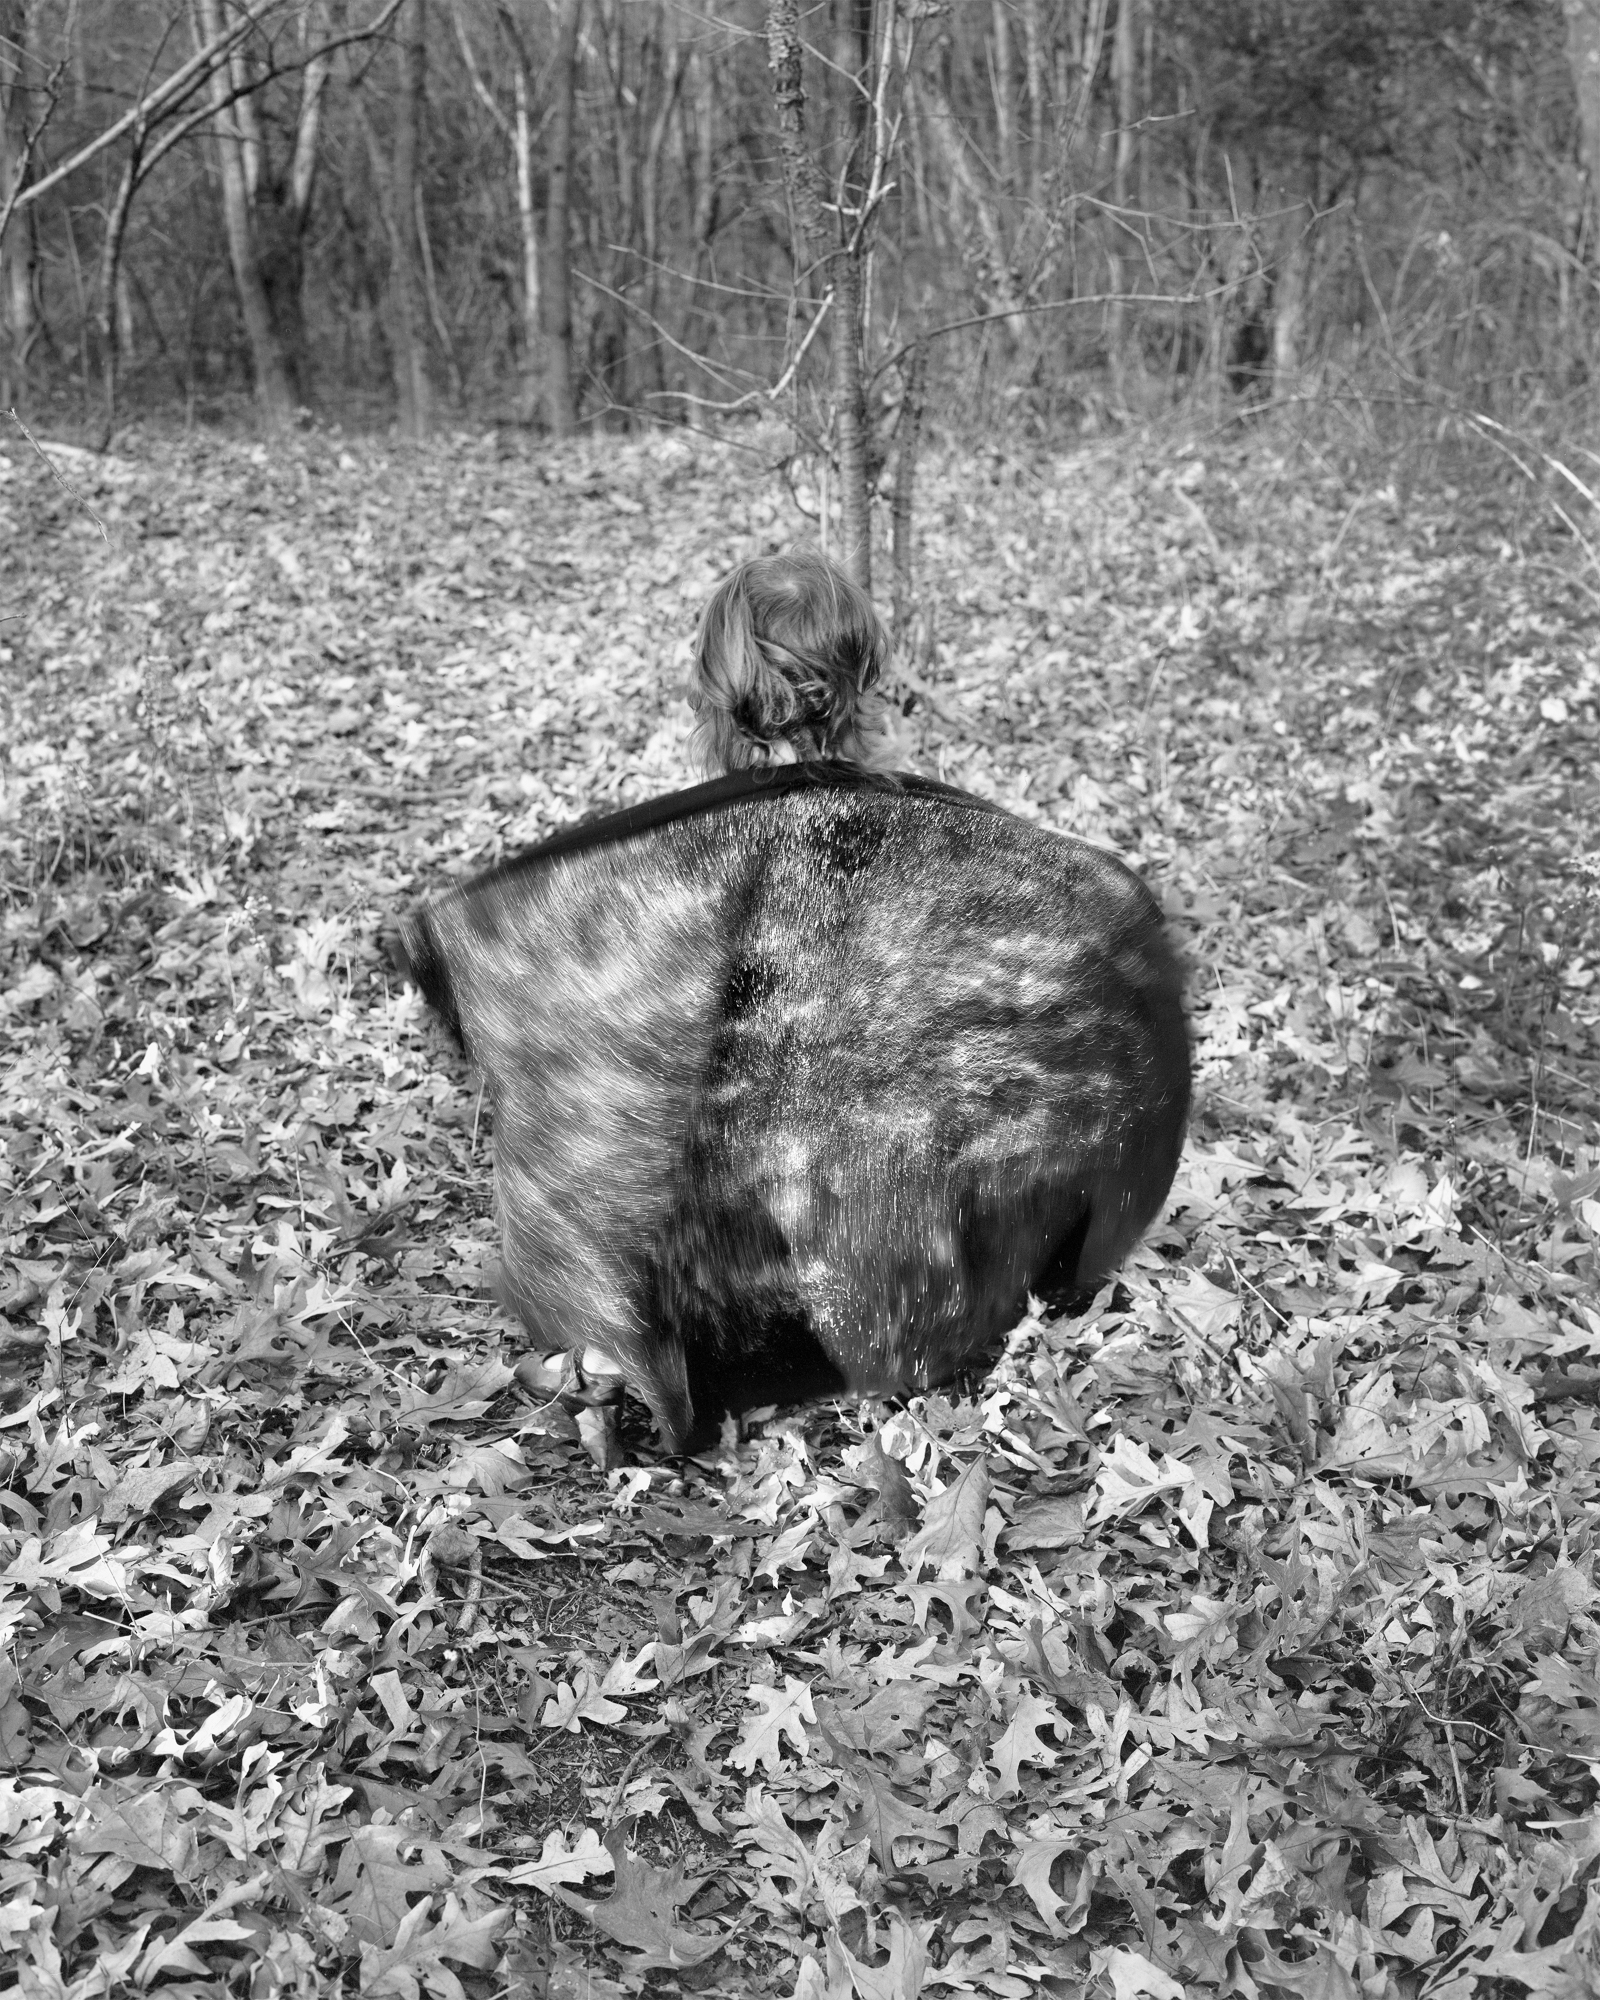   Sparkle, Fur, Autumn Spell , 2011 Archival pigment print mounted to rag board 19 x 23.75 in (48.26 x 60.33 cm) 